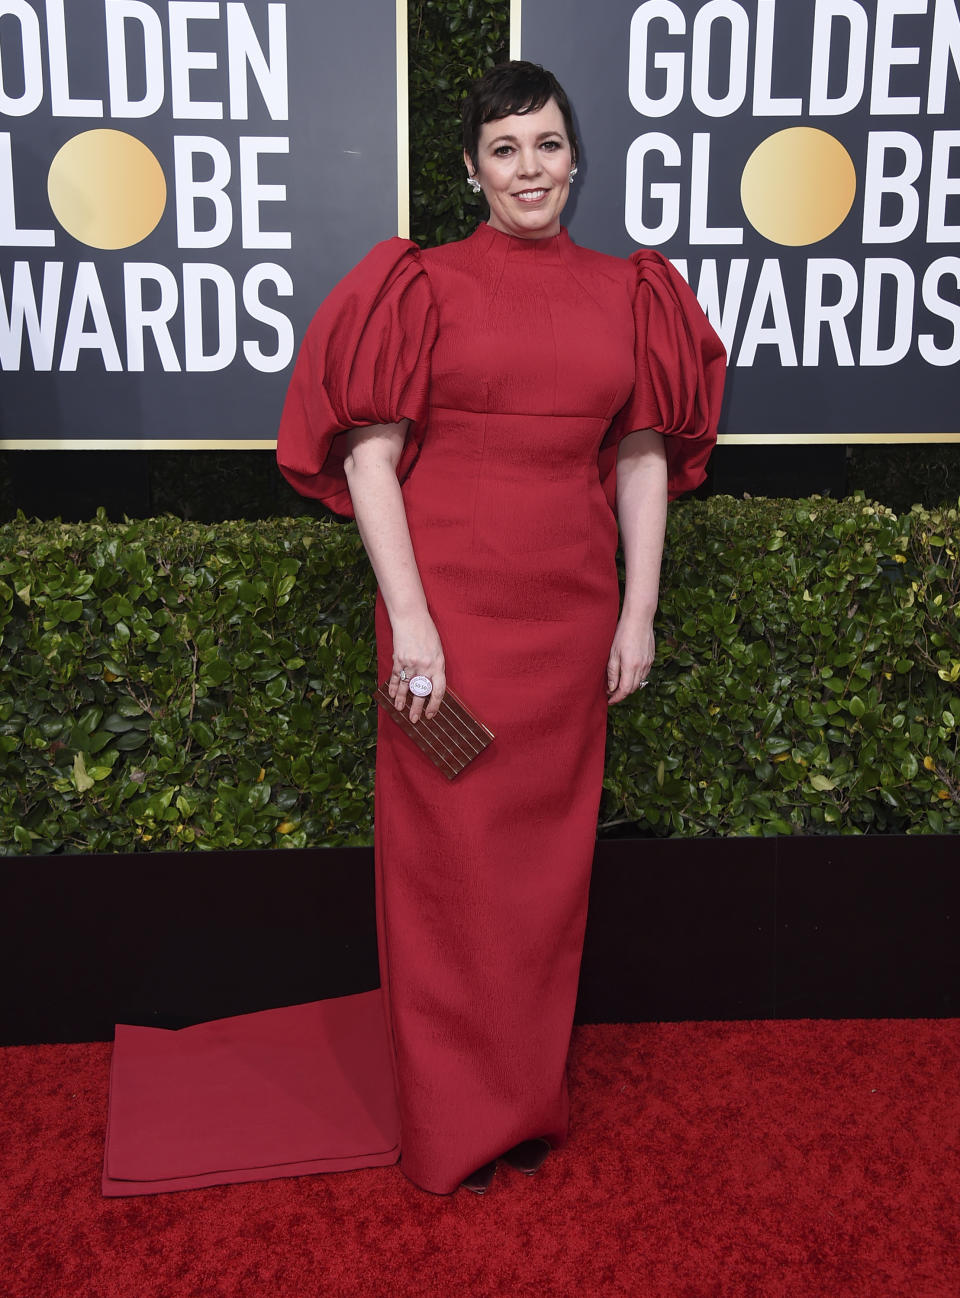 Olivia Colman arrives at the 77th annual Golden Globe Awards at the Beverly Hilton Hotel on Sunday, Jan. 5, 2020, in Beverly Hills, Calif. (Photo by Jordan Strauss/Invision/AP)